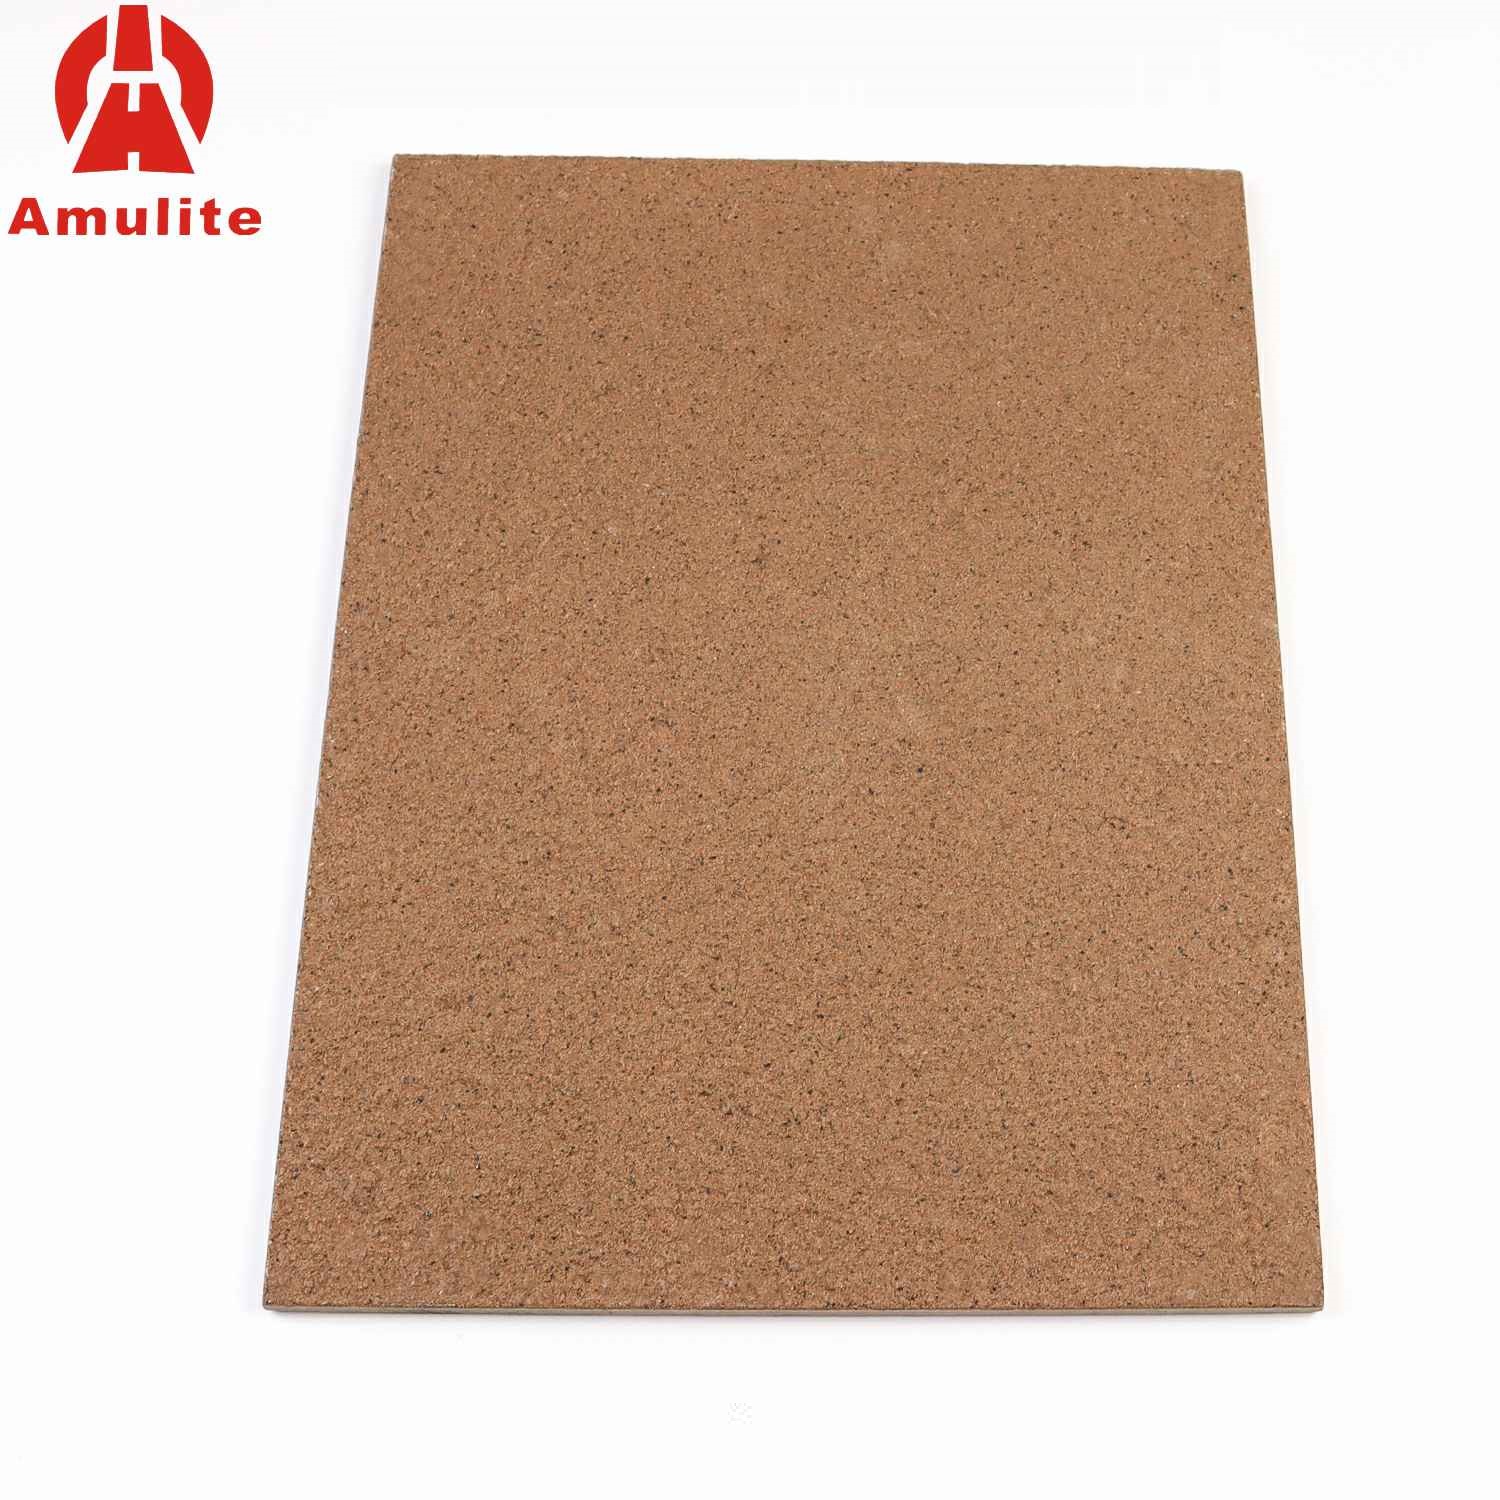 Real Stone Painting Fiber Cement Board (၂) ခု၊